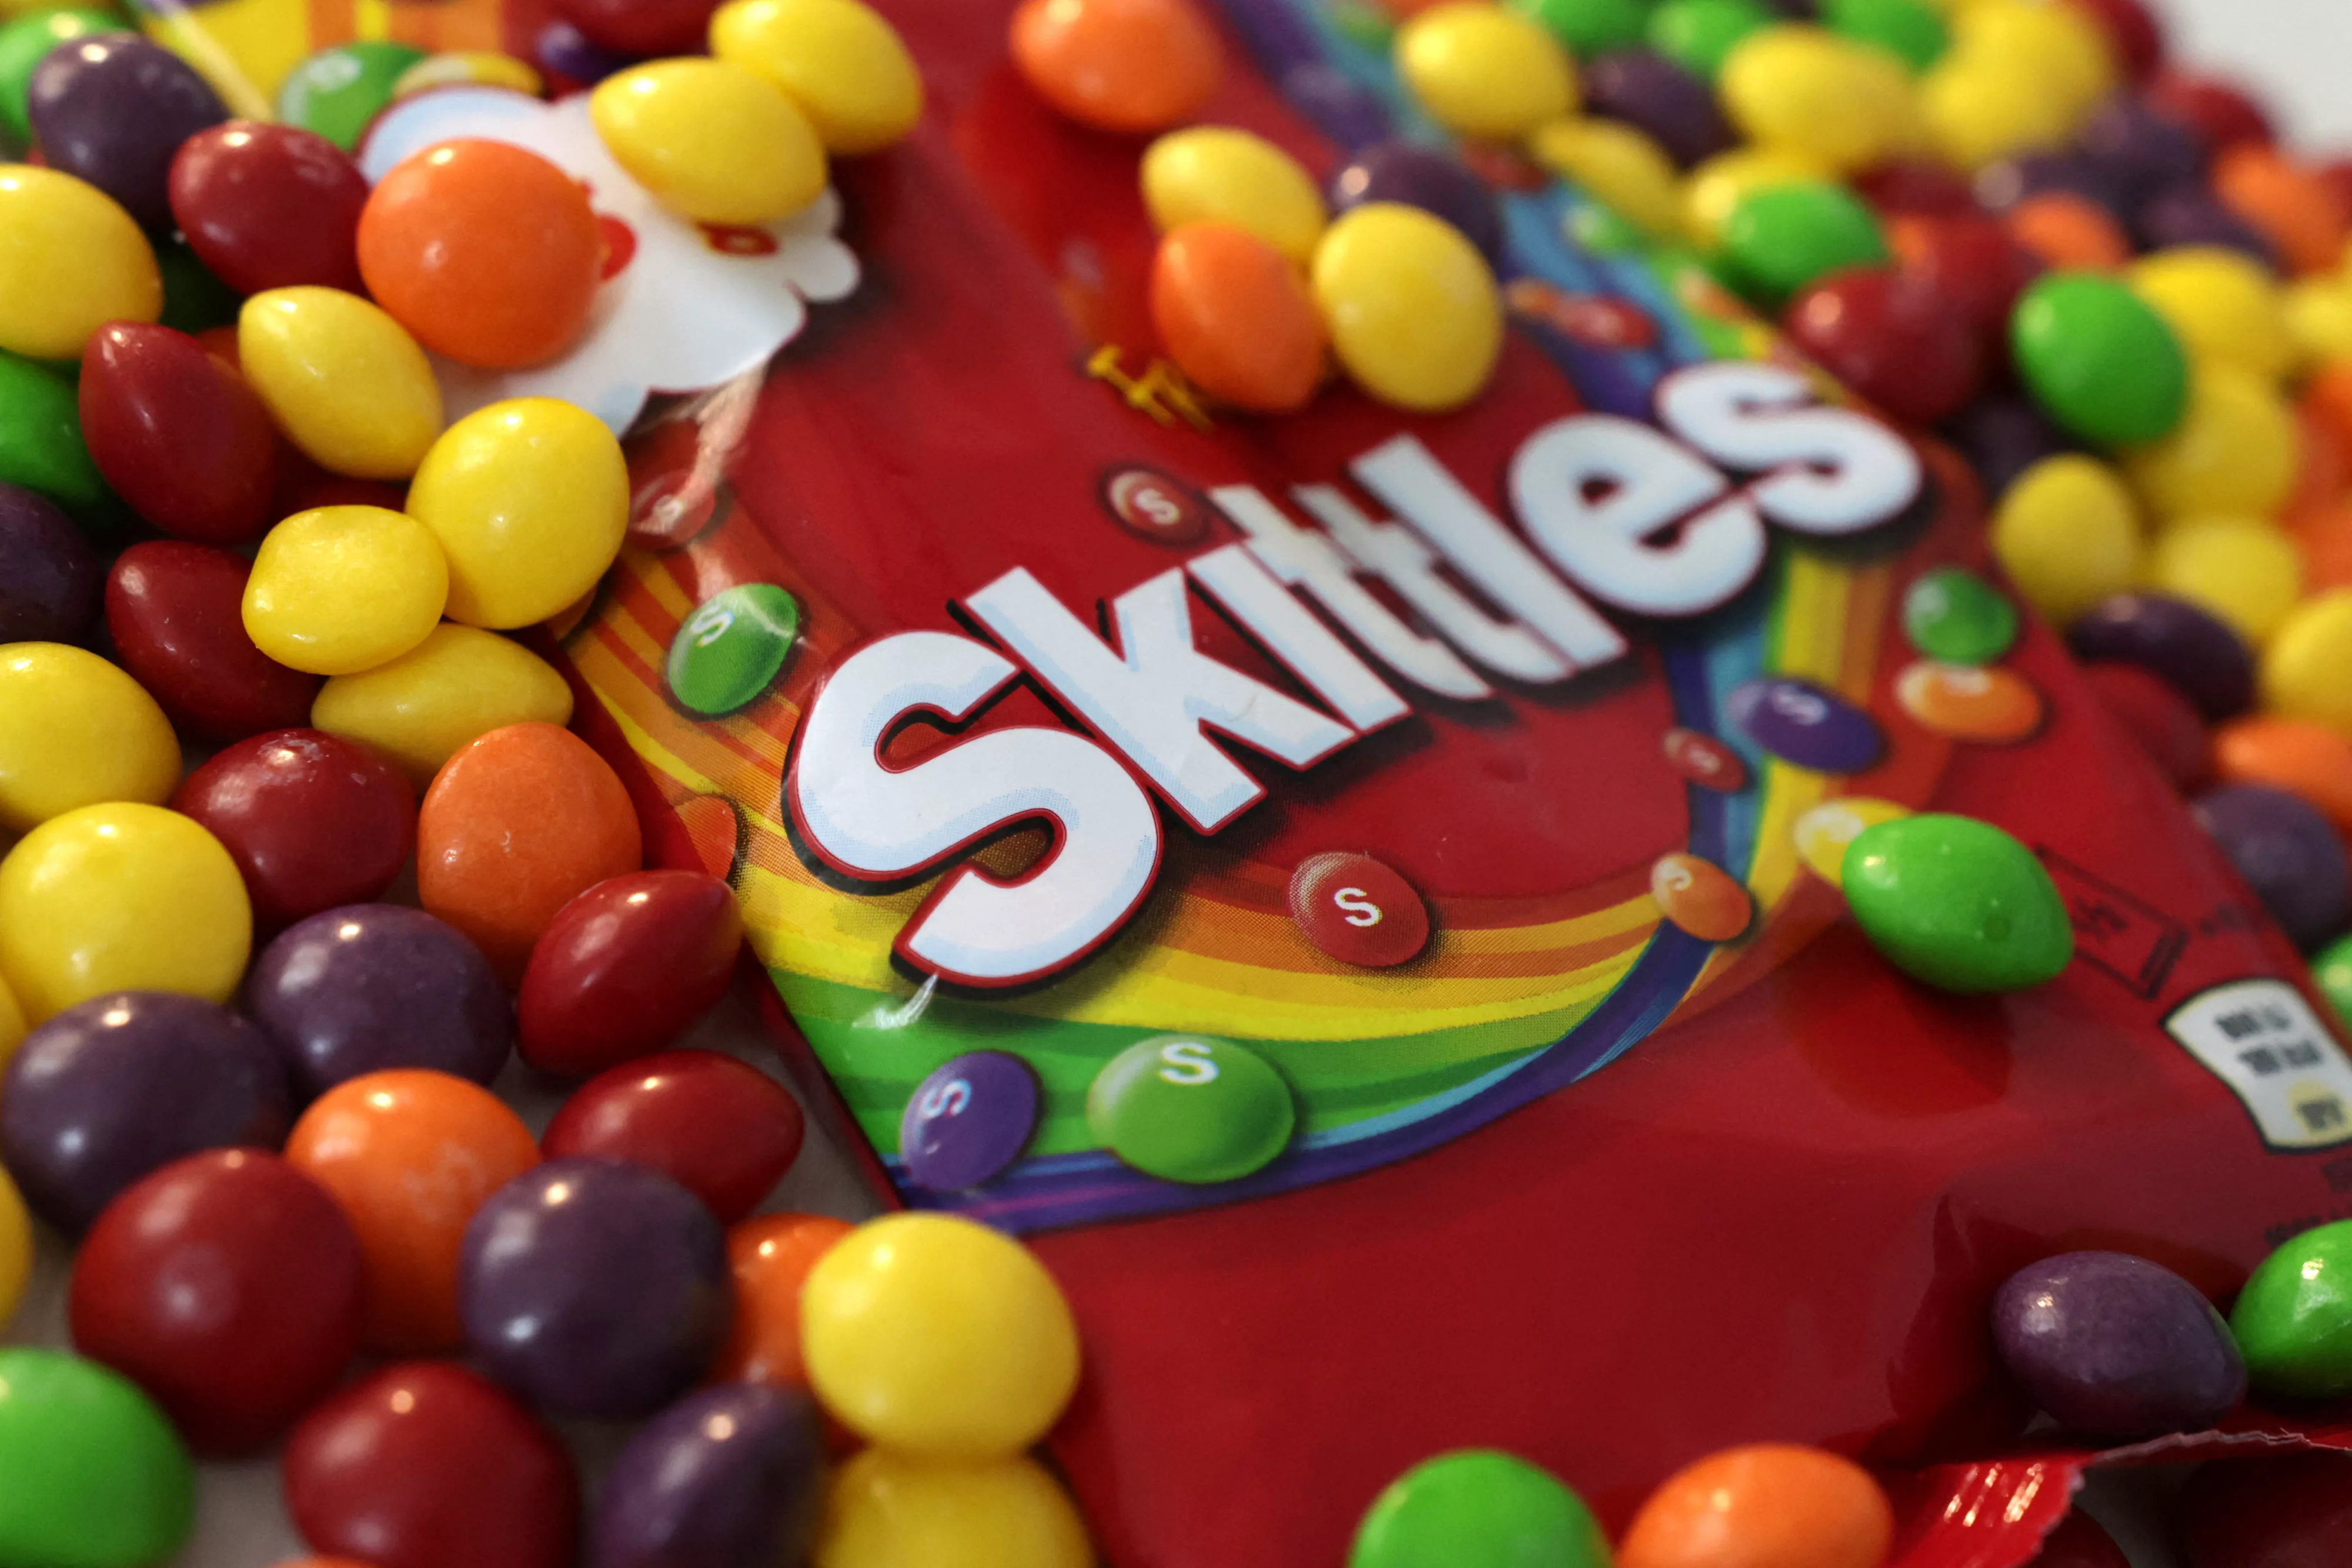 illustration-shows-skittles-candy-pack